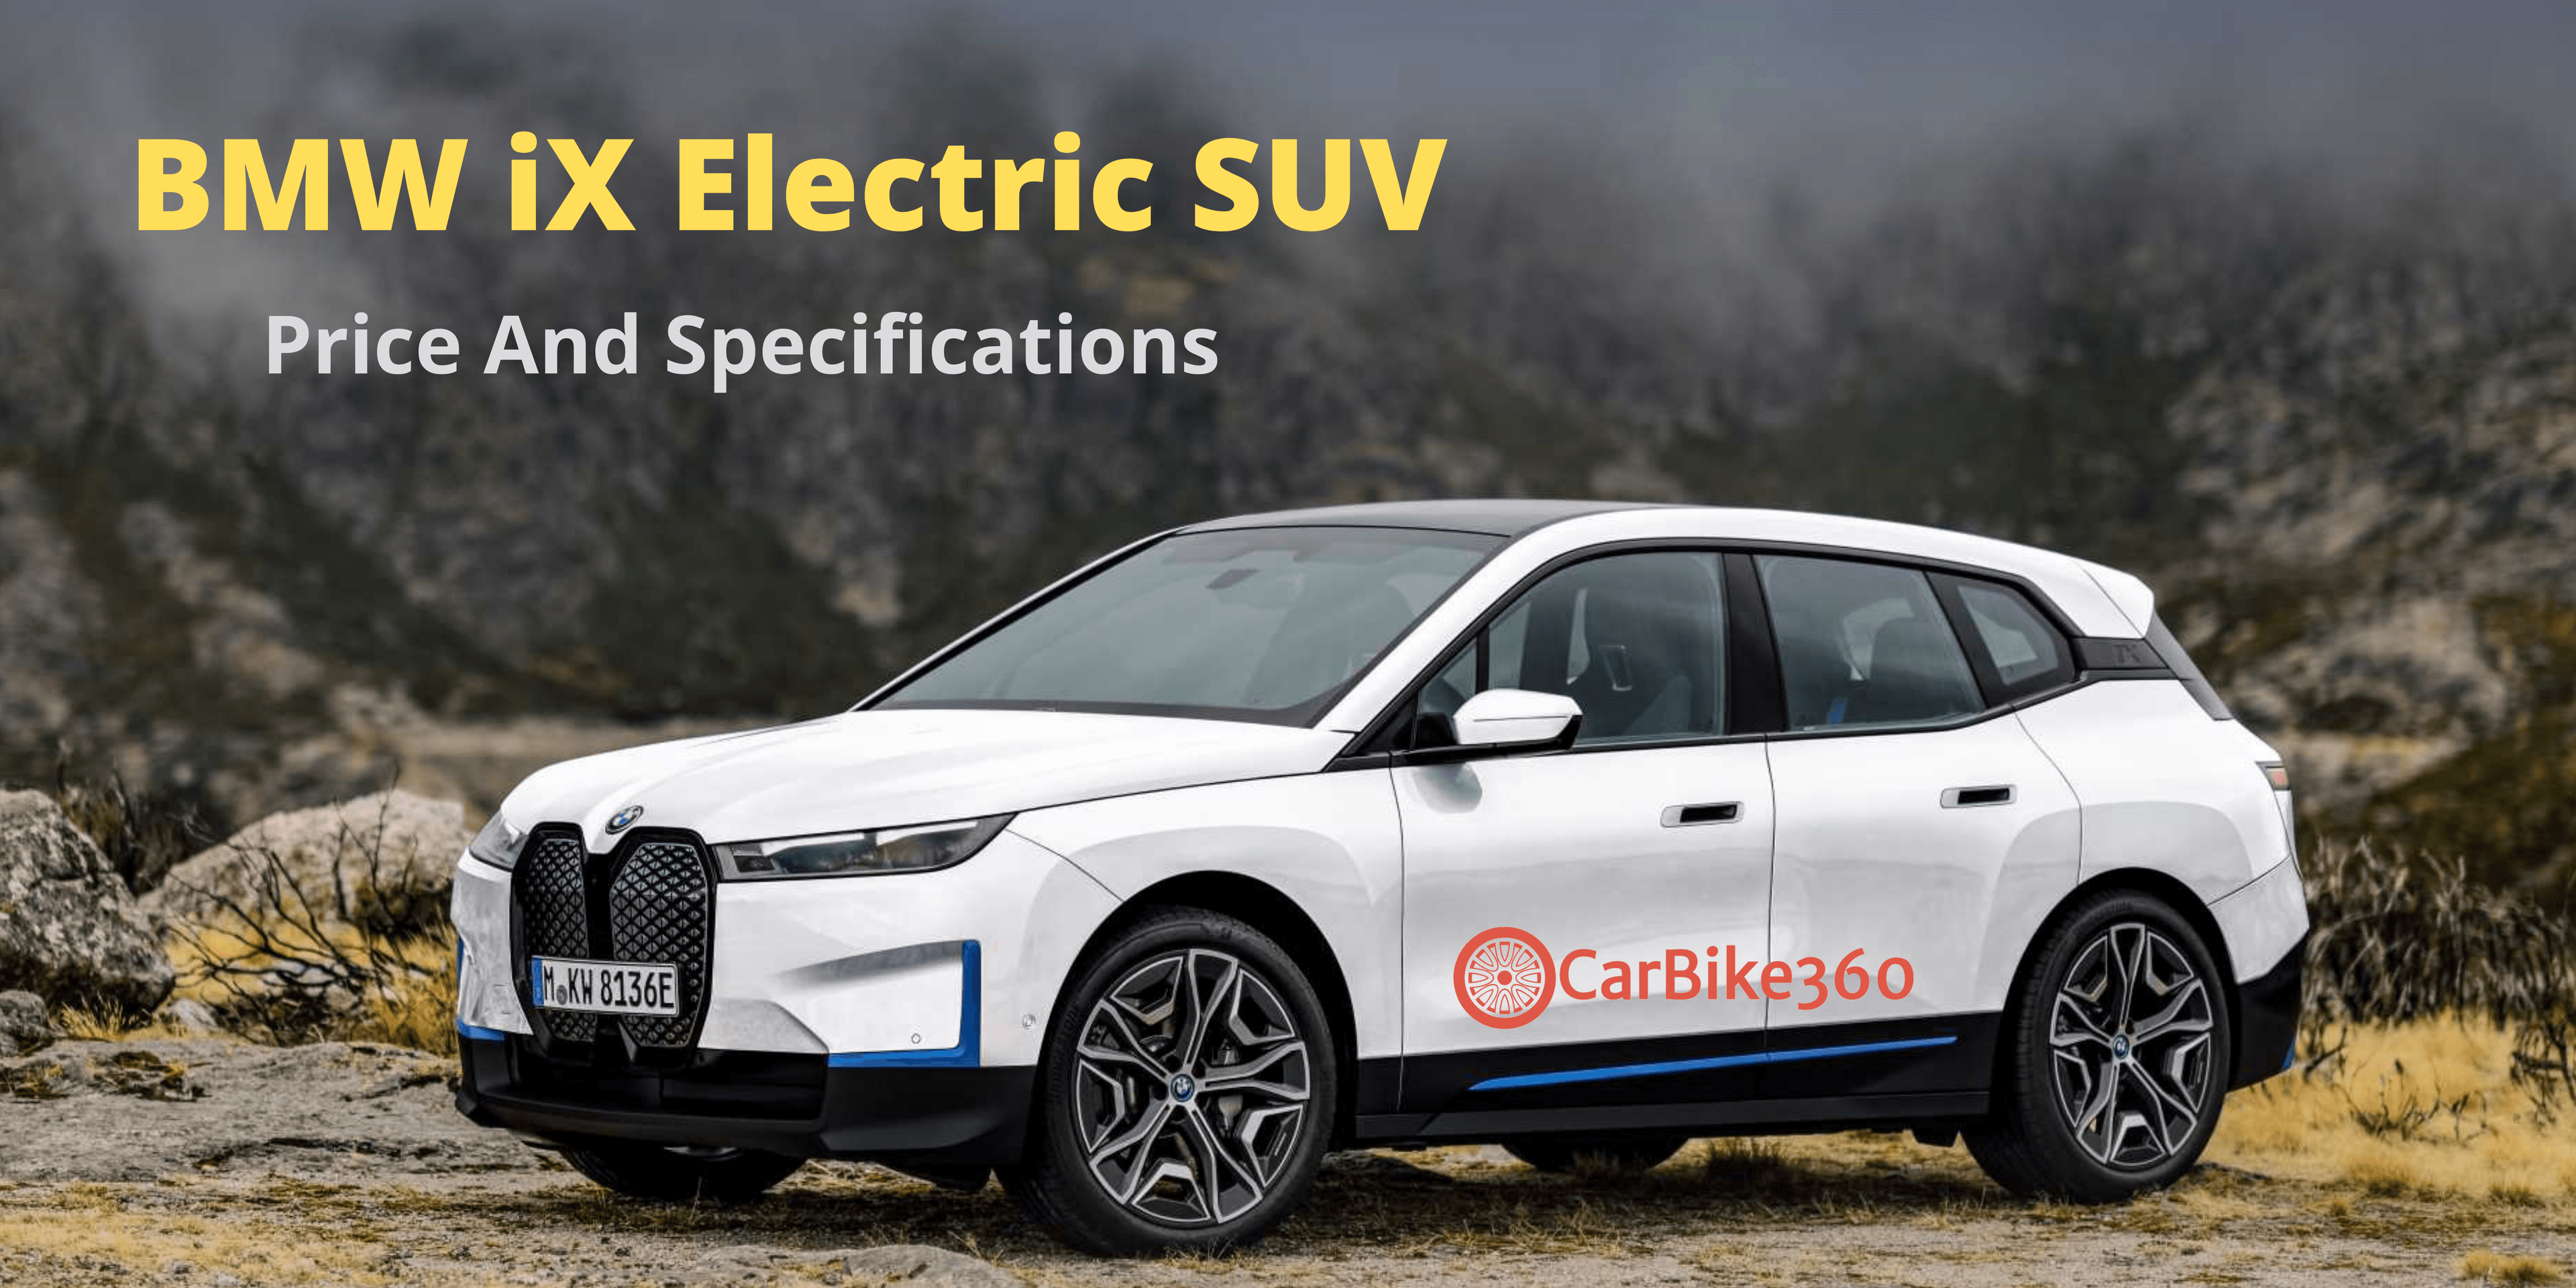 BMW iX Electric SUV Launched In India!